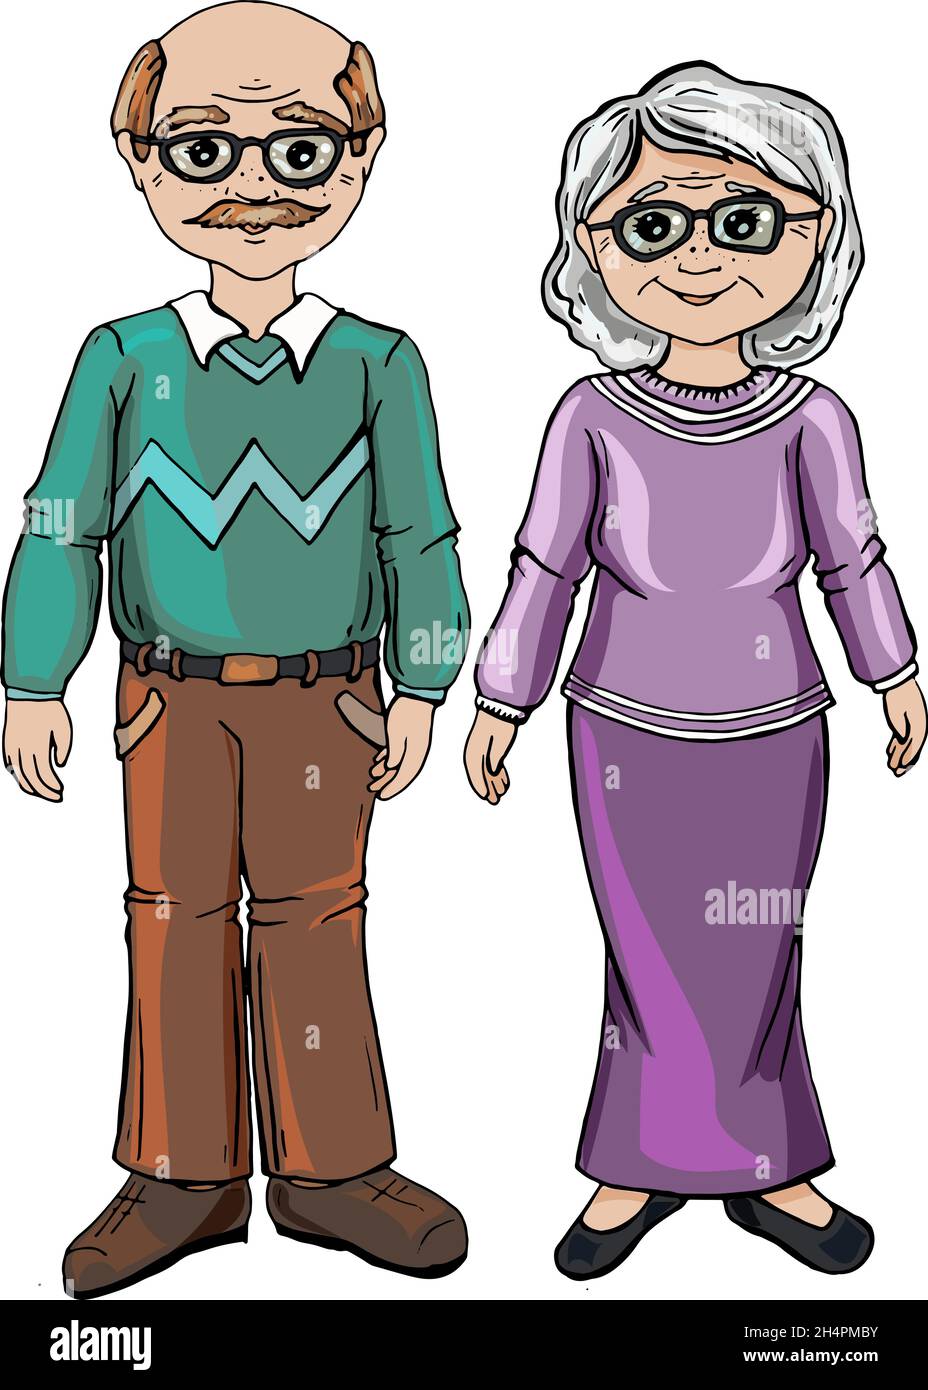 Senior citizen day special | Pencil drawings, Male sketch, Drawings